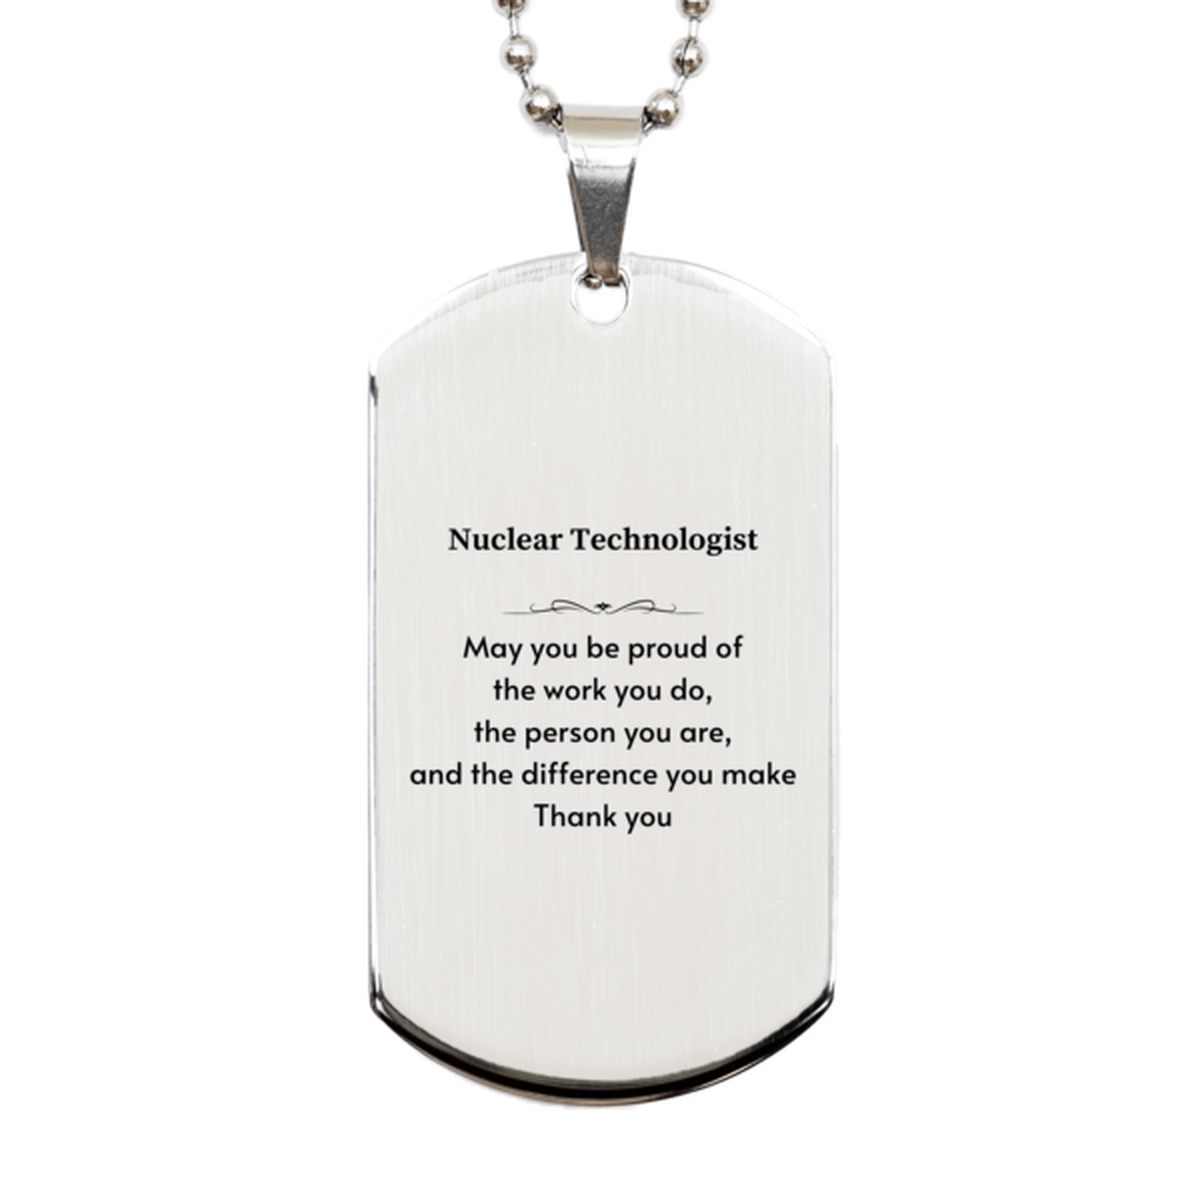 Heartwarming Silver Dog Tag Retirement Coworkers Gifts for Nuclear Technologist, Nuclear Technologist May You be proud of the work you do, the person you are Gifts for Boss Men Women Friends